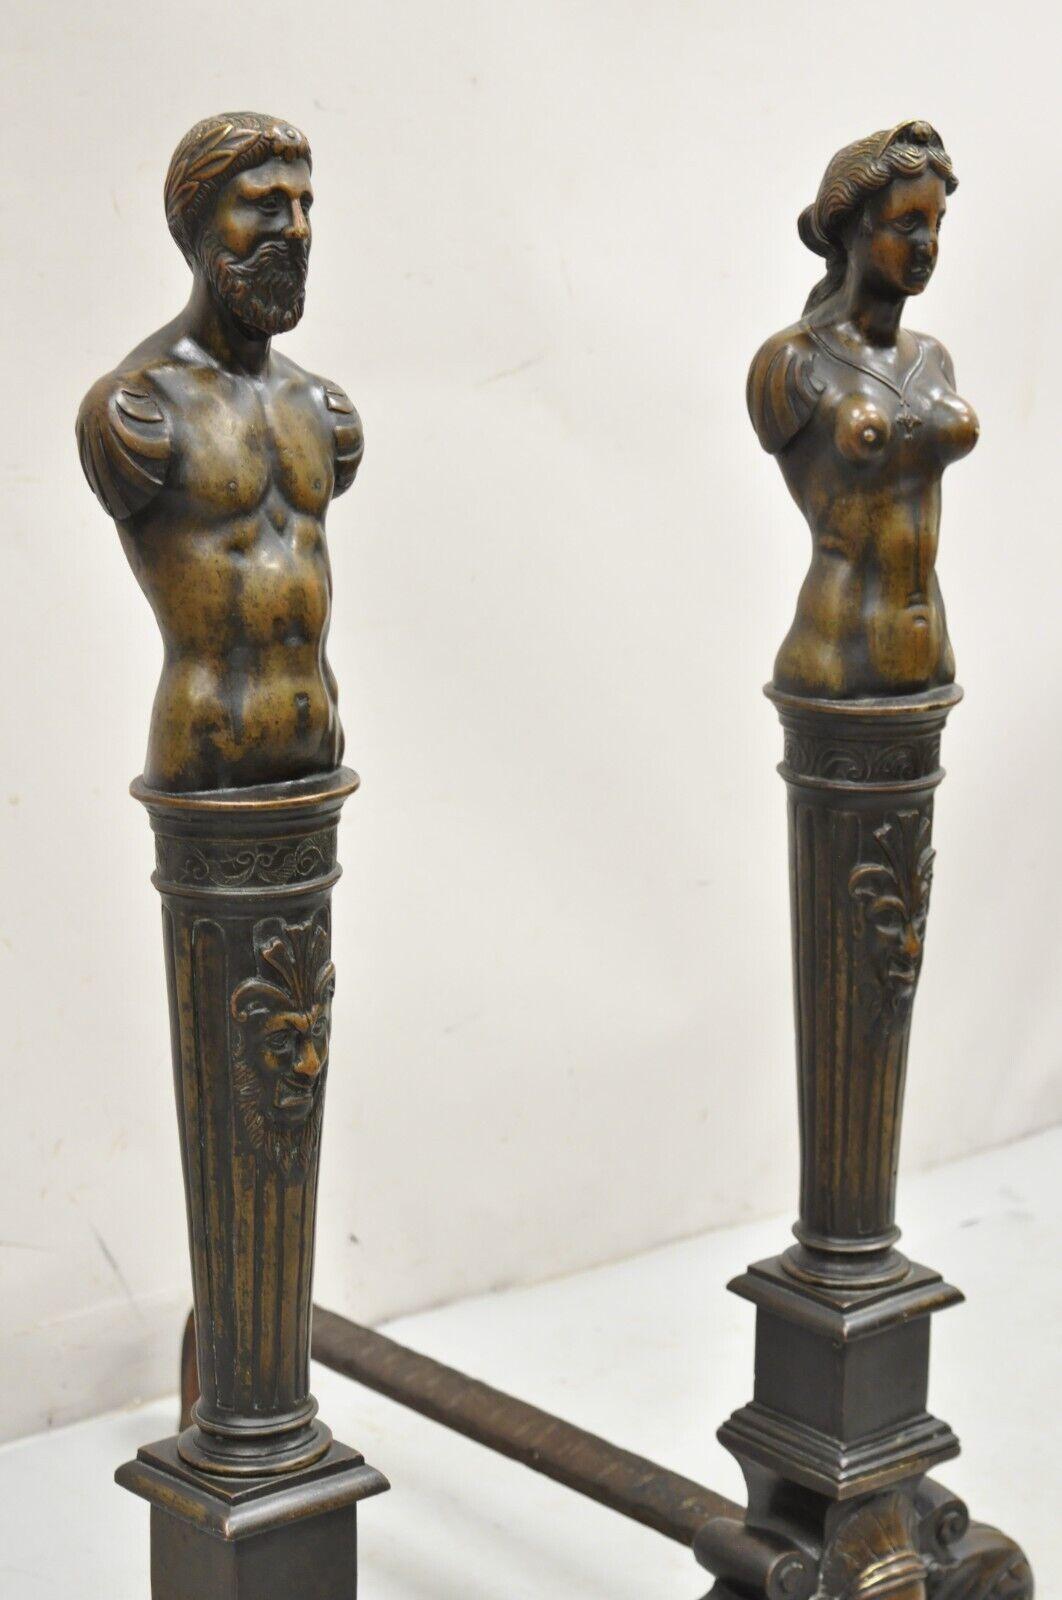 Antique French Renaissance Revival Large Figural Man and Woman Andirons - a Pair For Sale 6